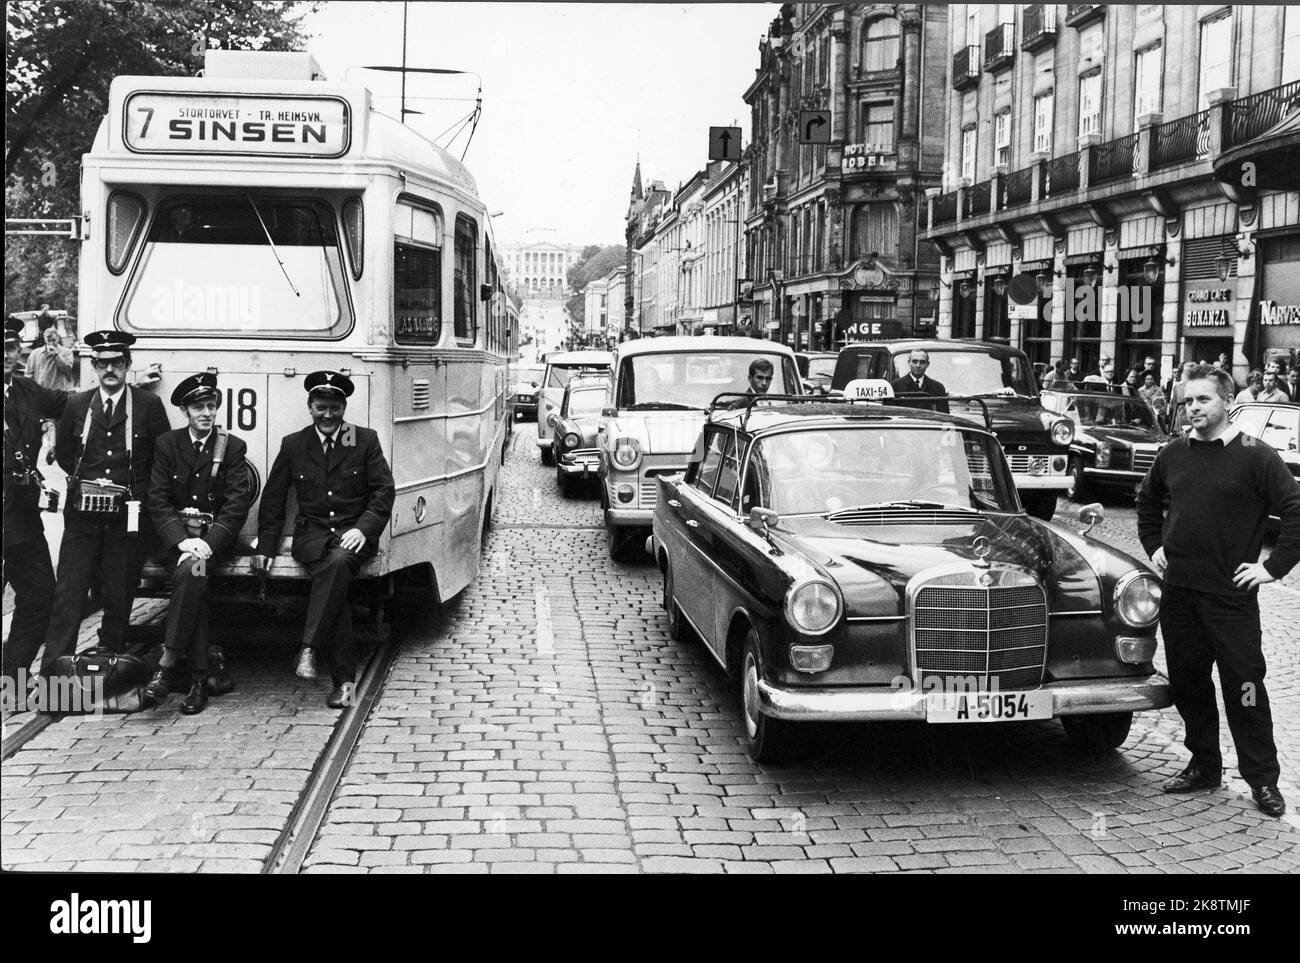 Karl Johan, Oslo 19701007 The National Organization LO received almost 100 per cent support for a quarter strike in protest against the state budget. The budget contains tax heights on, among other things. Petrol, tobacco and alcohol. Here trams and taxis have stopped at Karl Johans gate, where R. Wold, W Photo: NTB / NTB Stock Photo